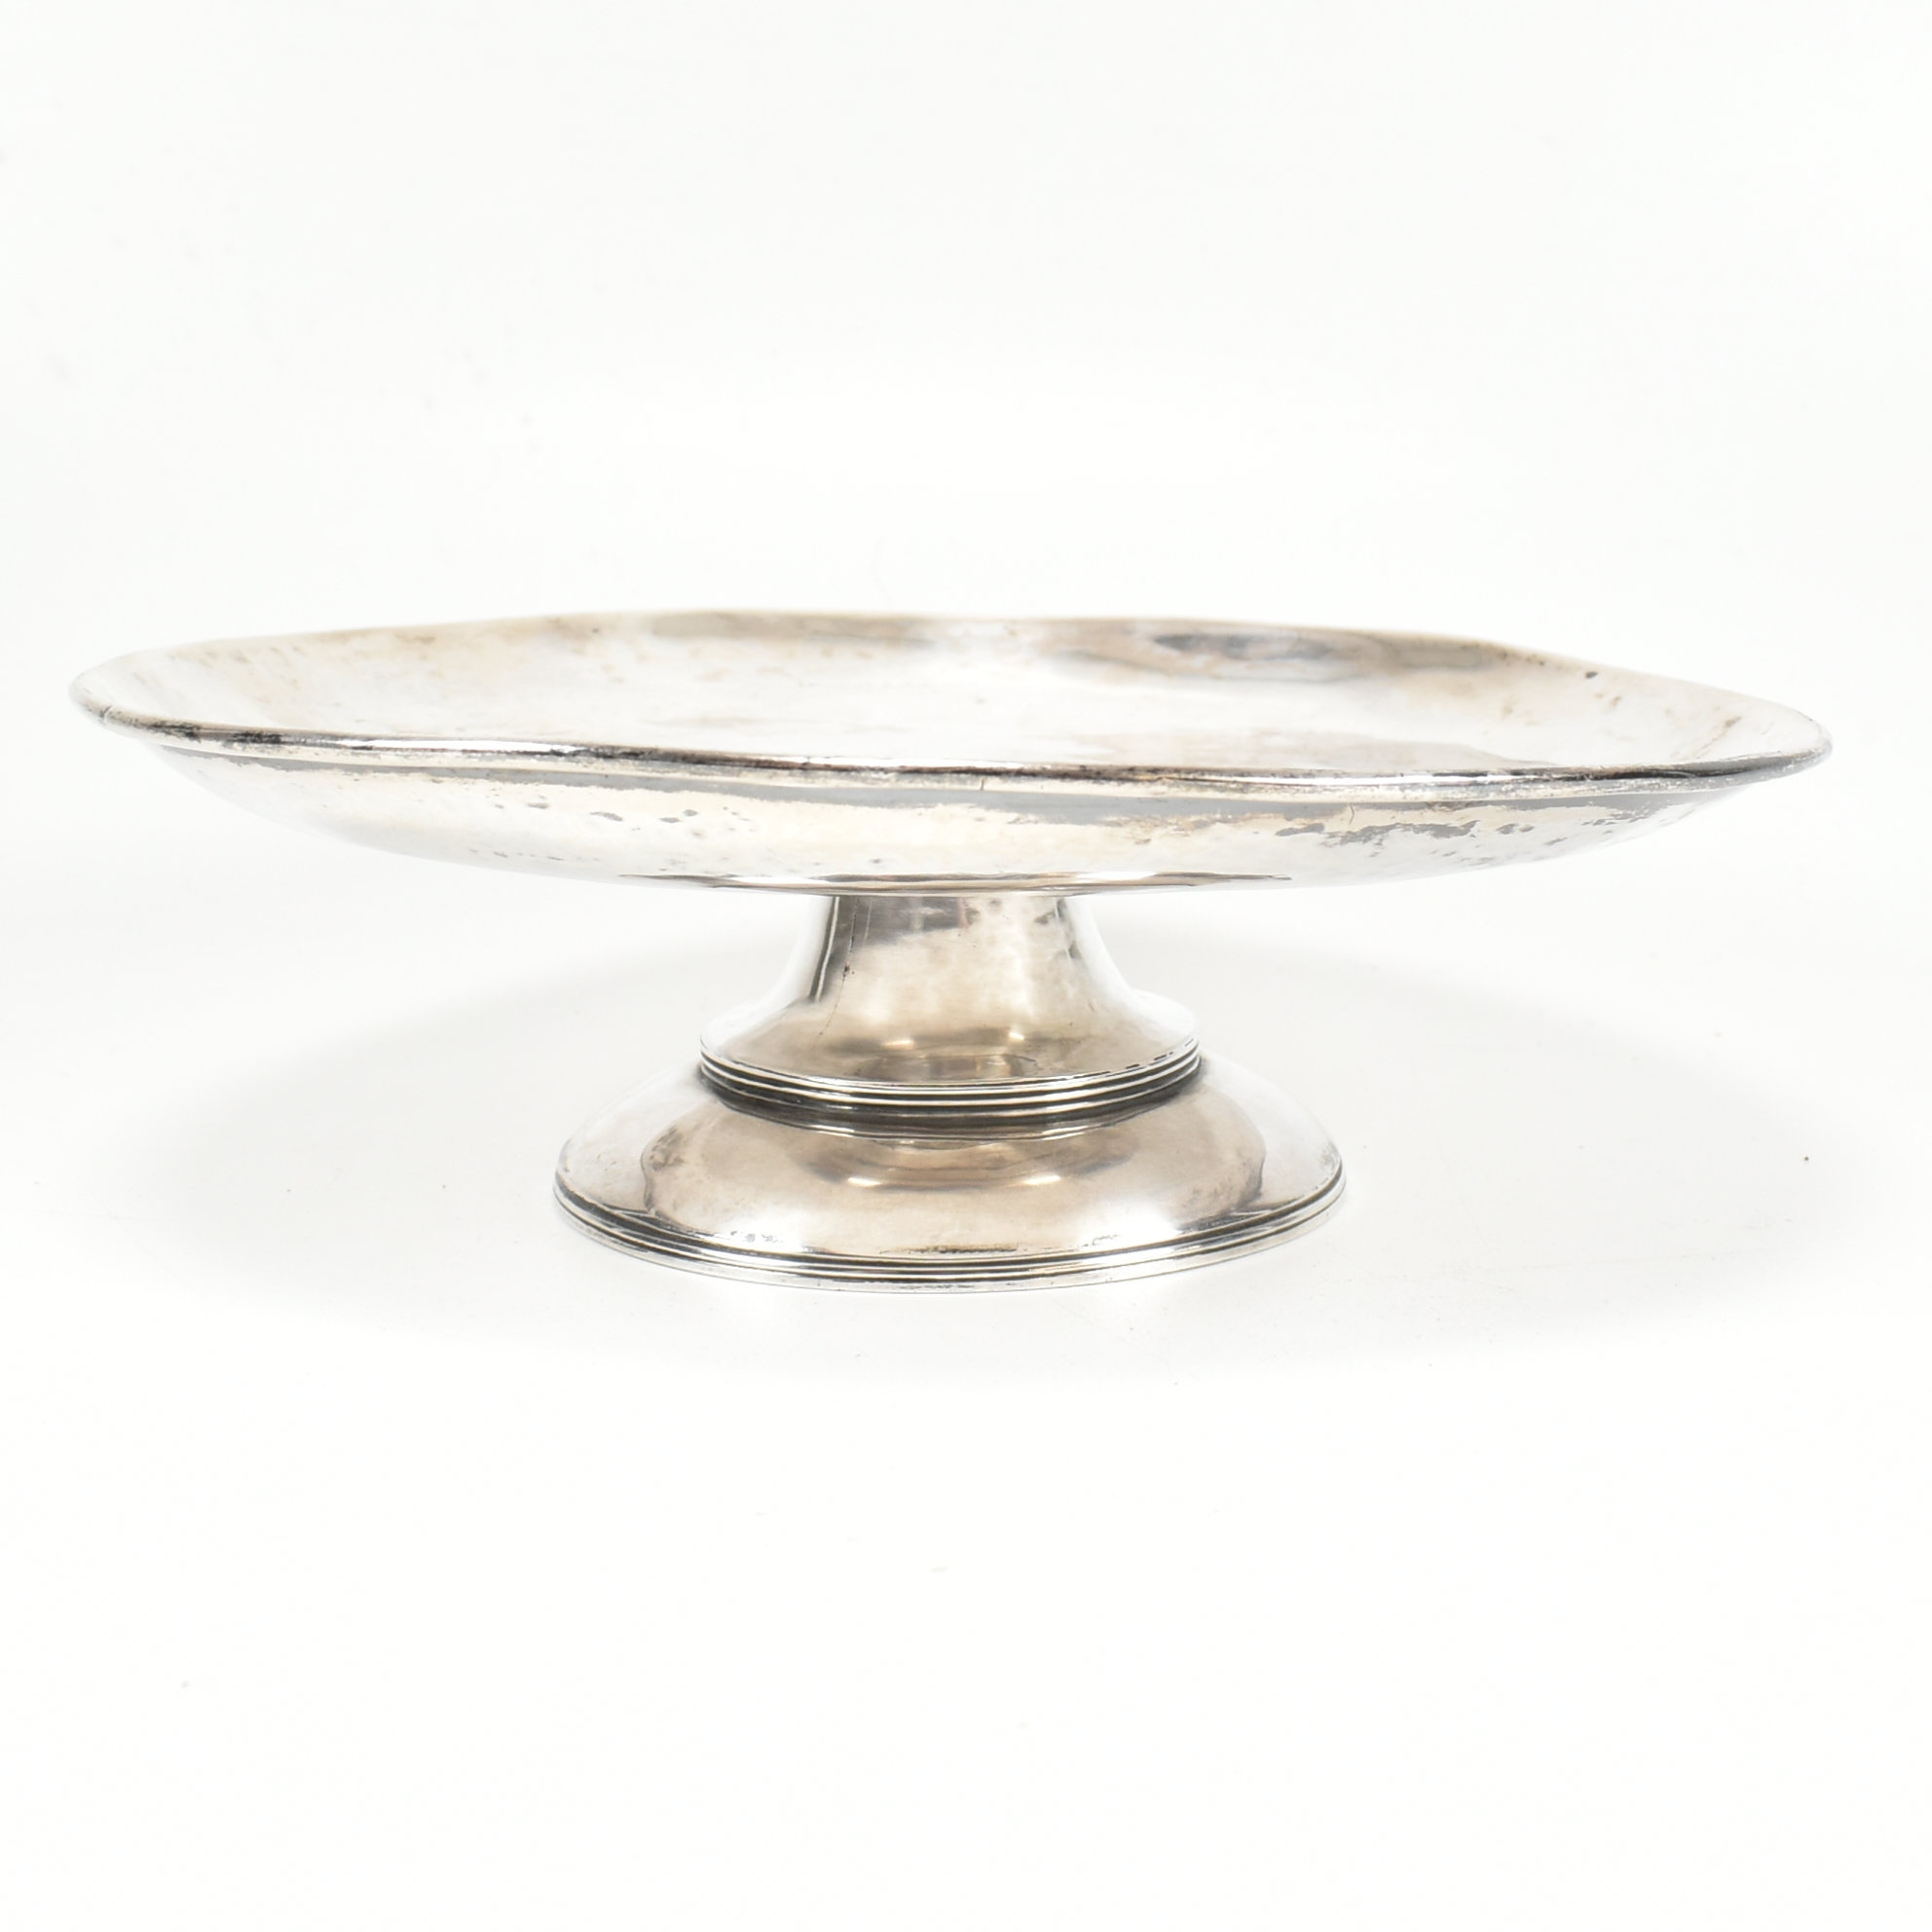 1960 ARTS & CRAFTS STYLE HALLMARKED SILVER COMPOTE - Image 4 of 6